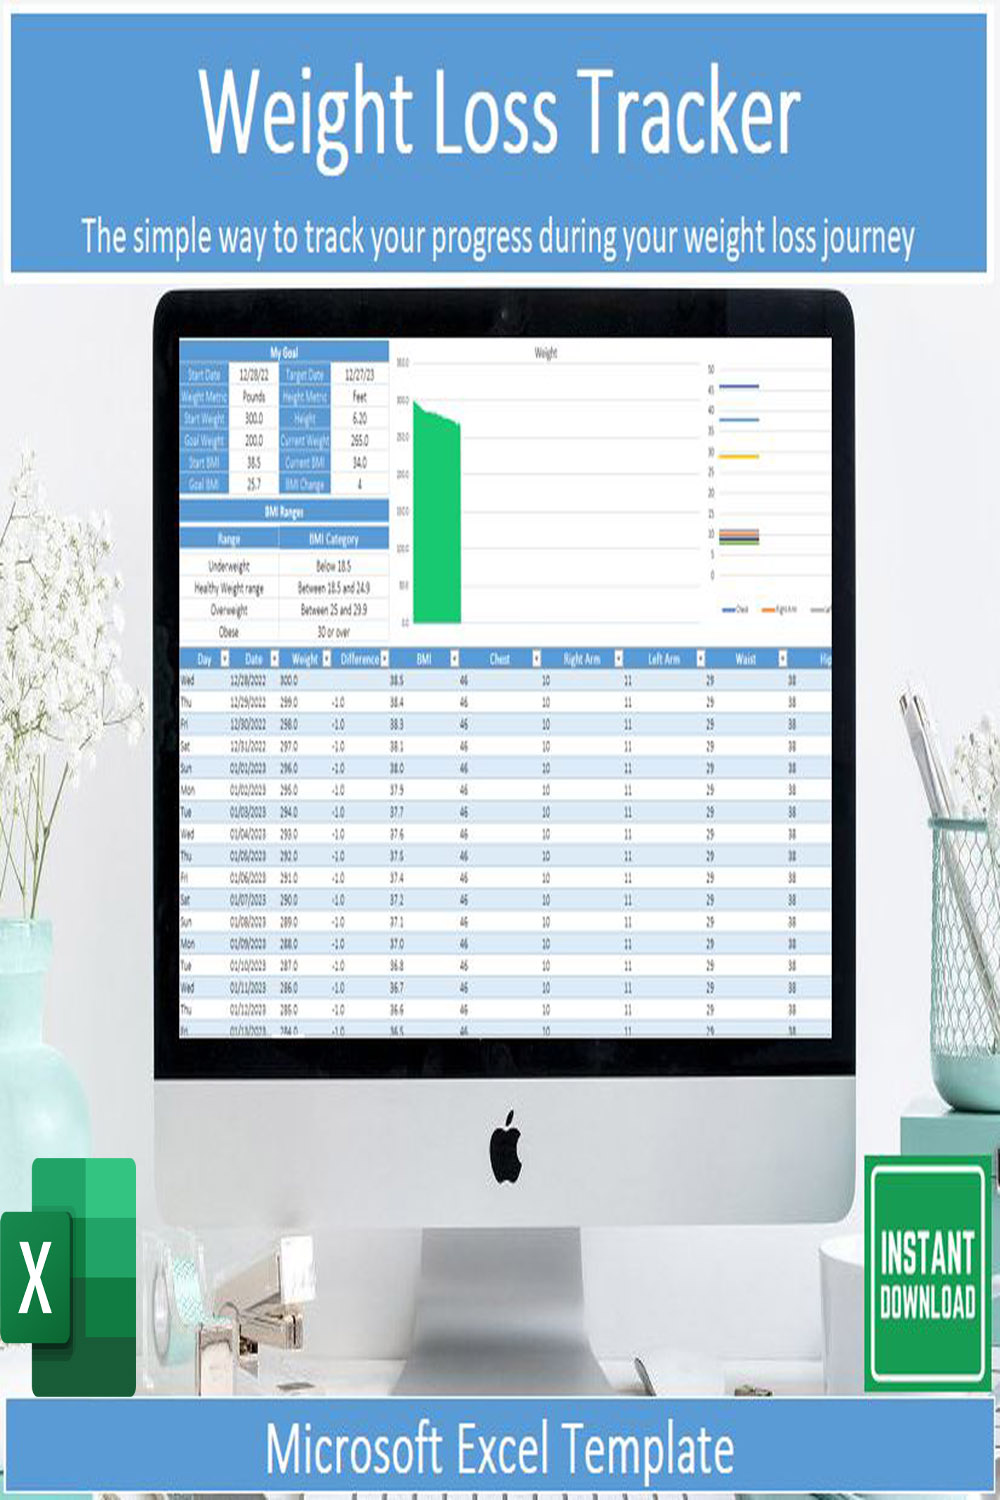 Editable Weight Loss Tracker Template for Microsoft Excel pinterest image.